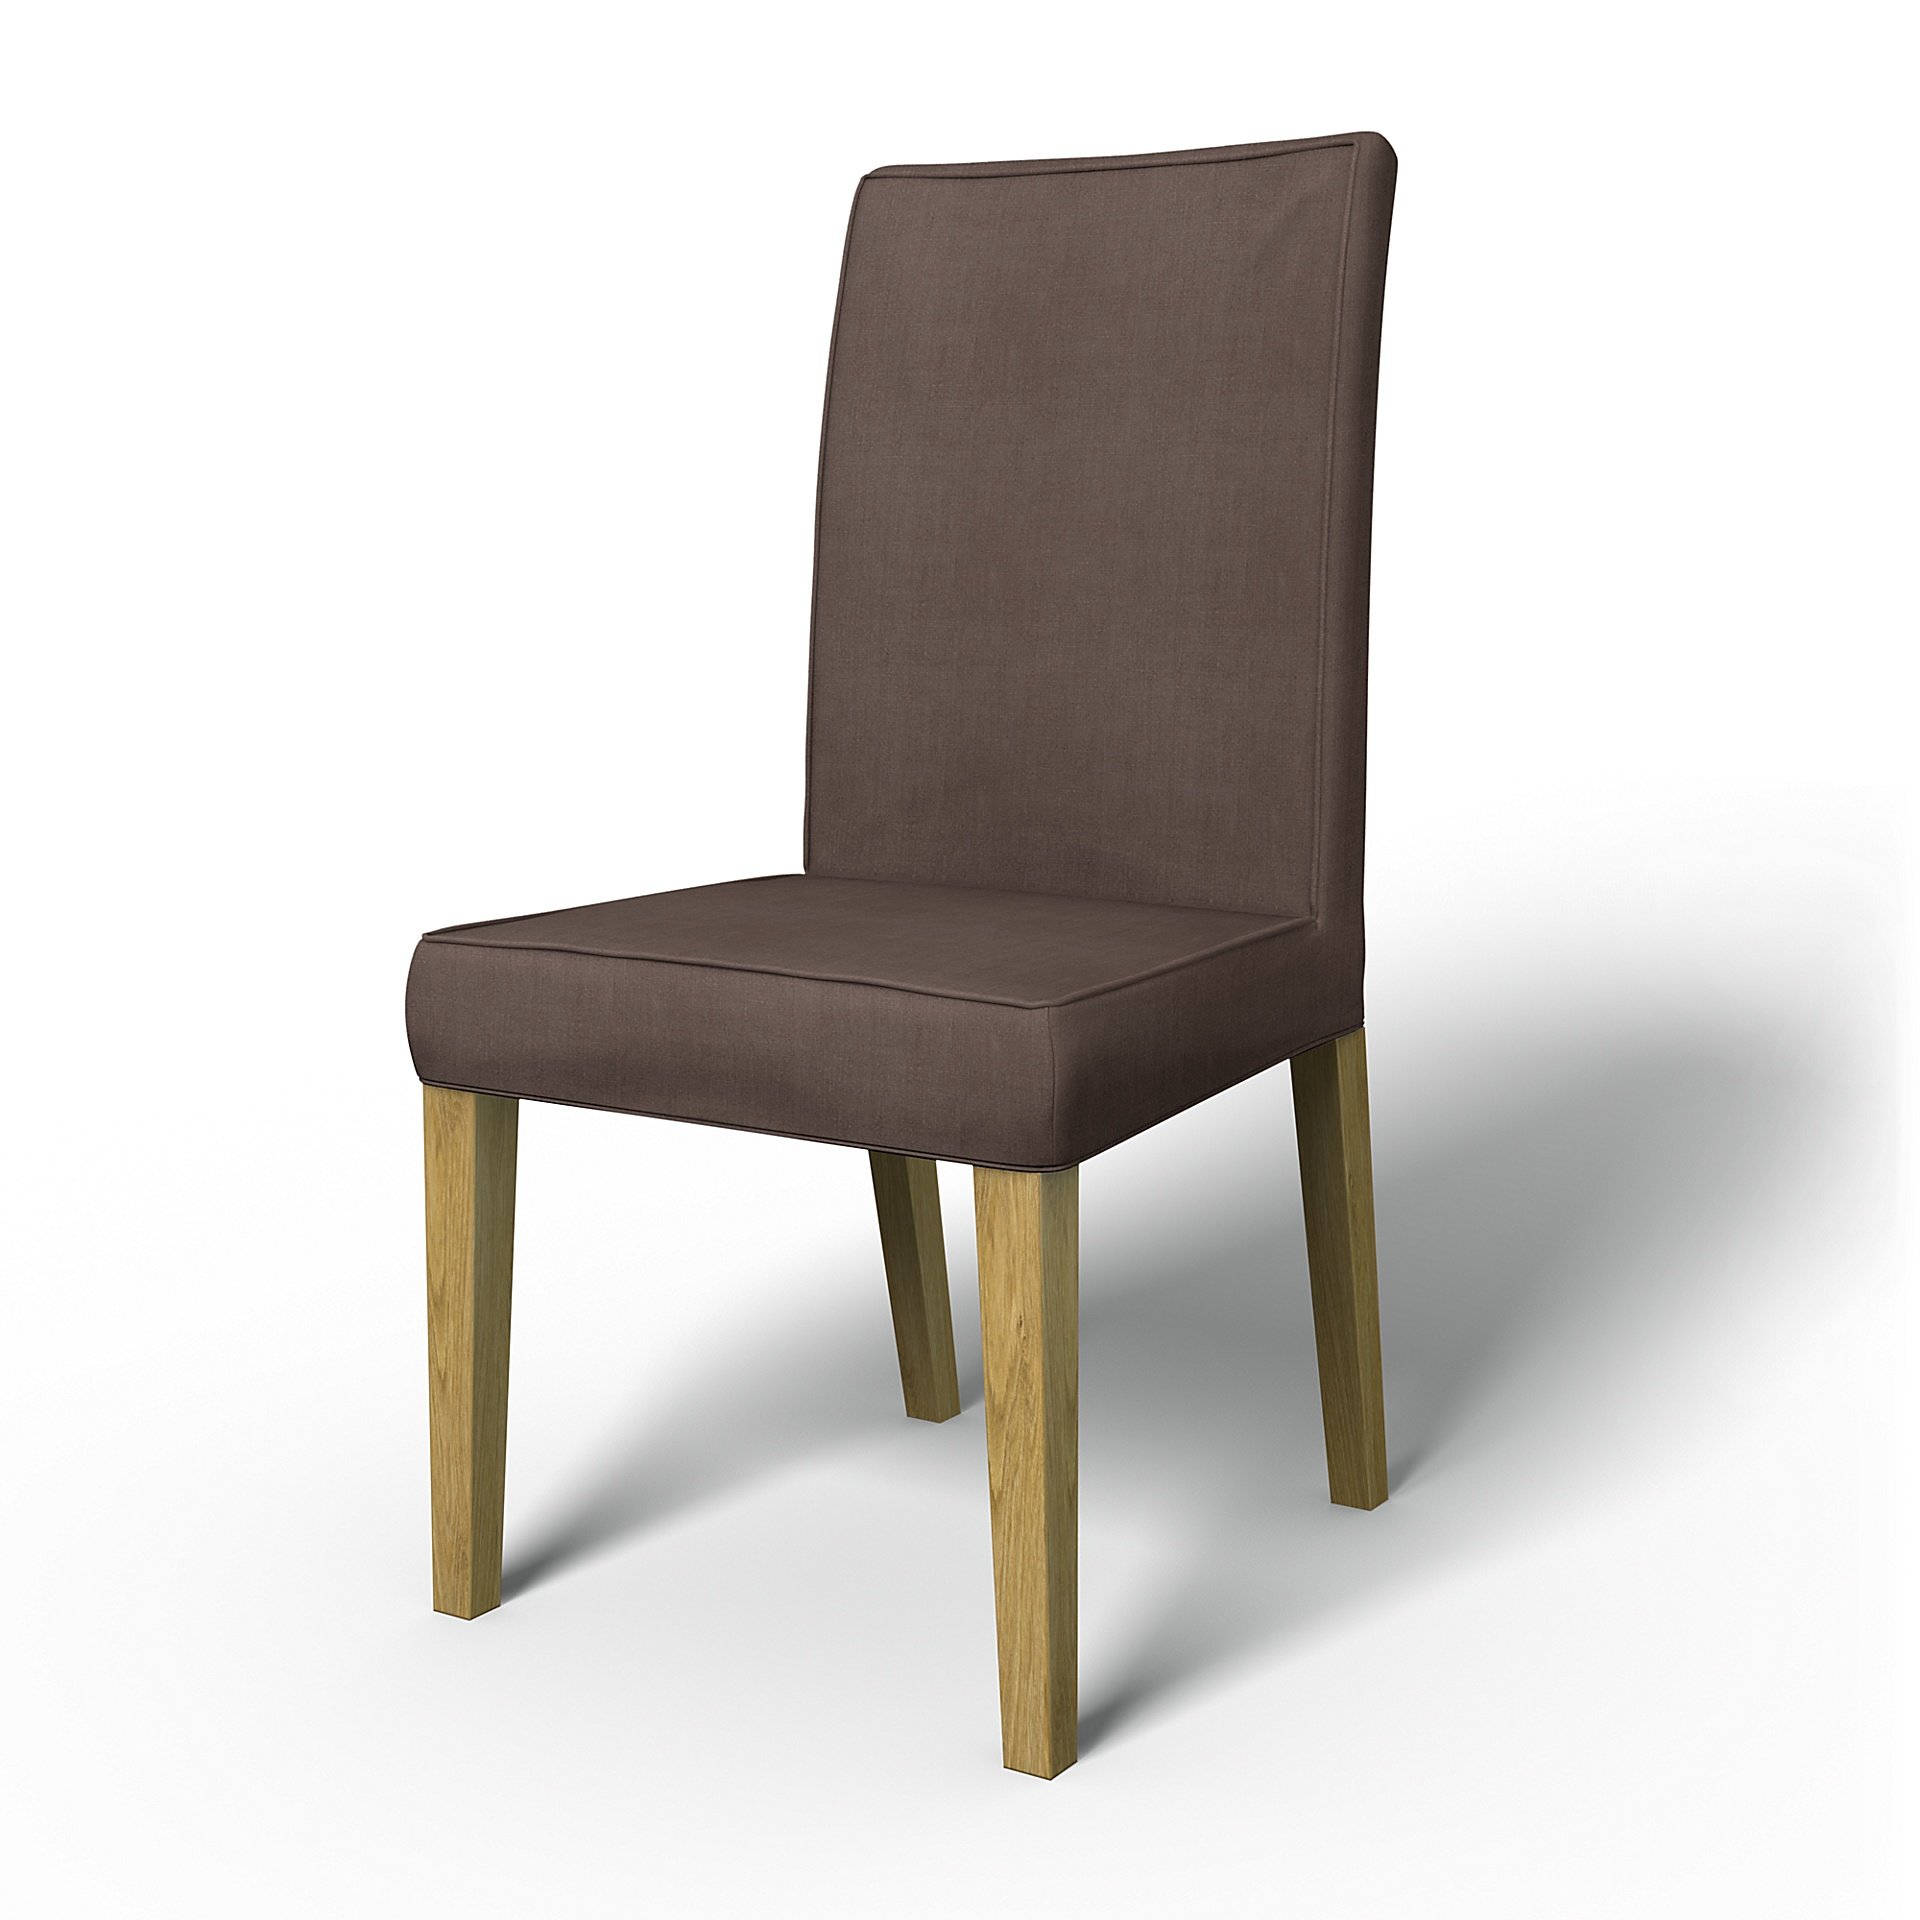 IKEA - Henriksdal Dining Chair Cover with piping (Standard model), Cocoa, Linen - Bemz